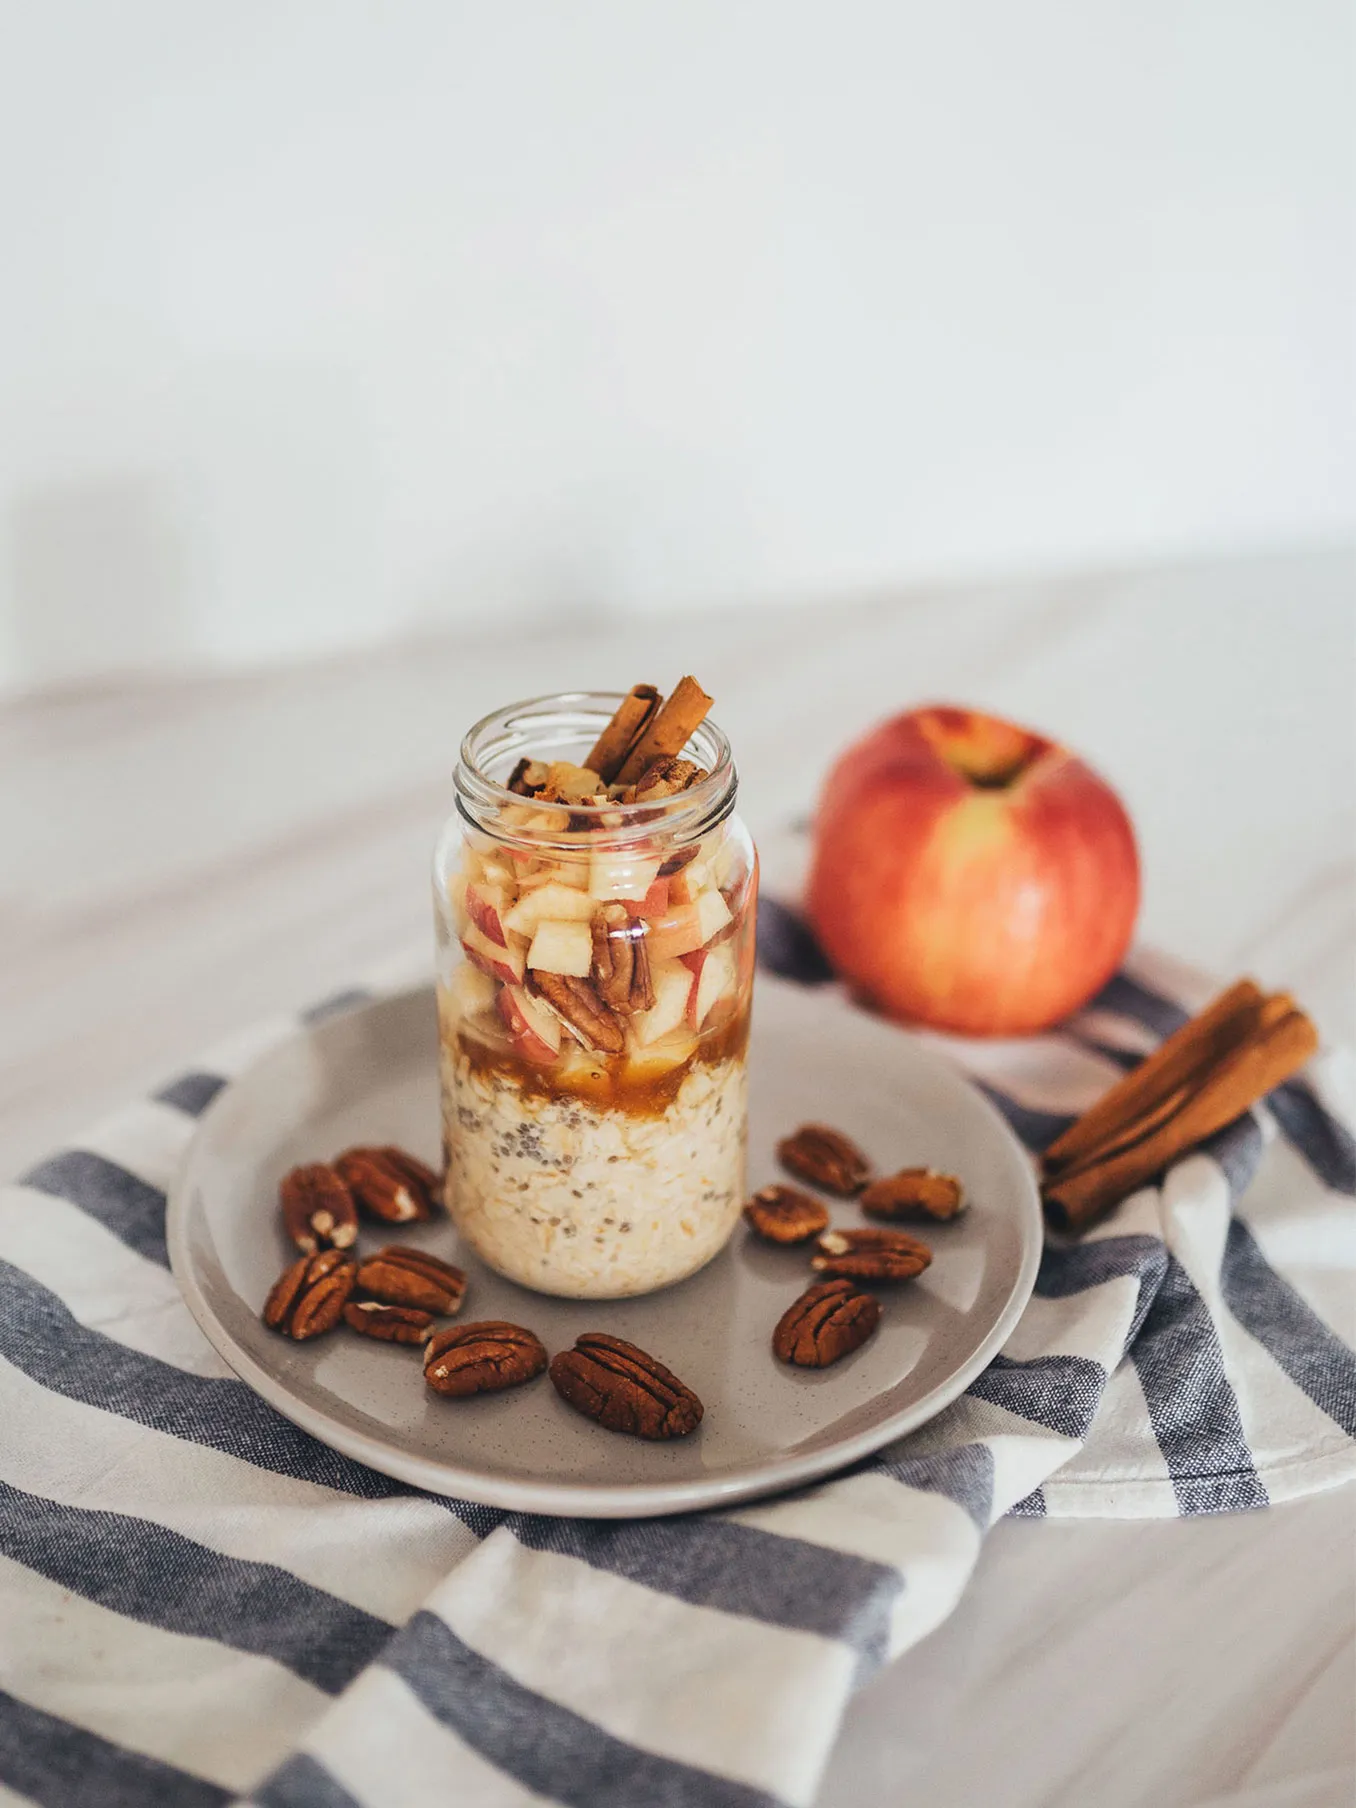 Easy Overnight Oats - 4 Flavors